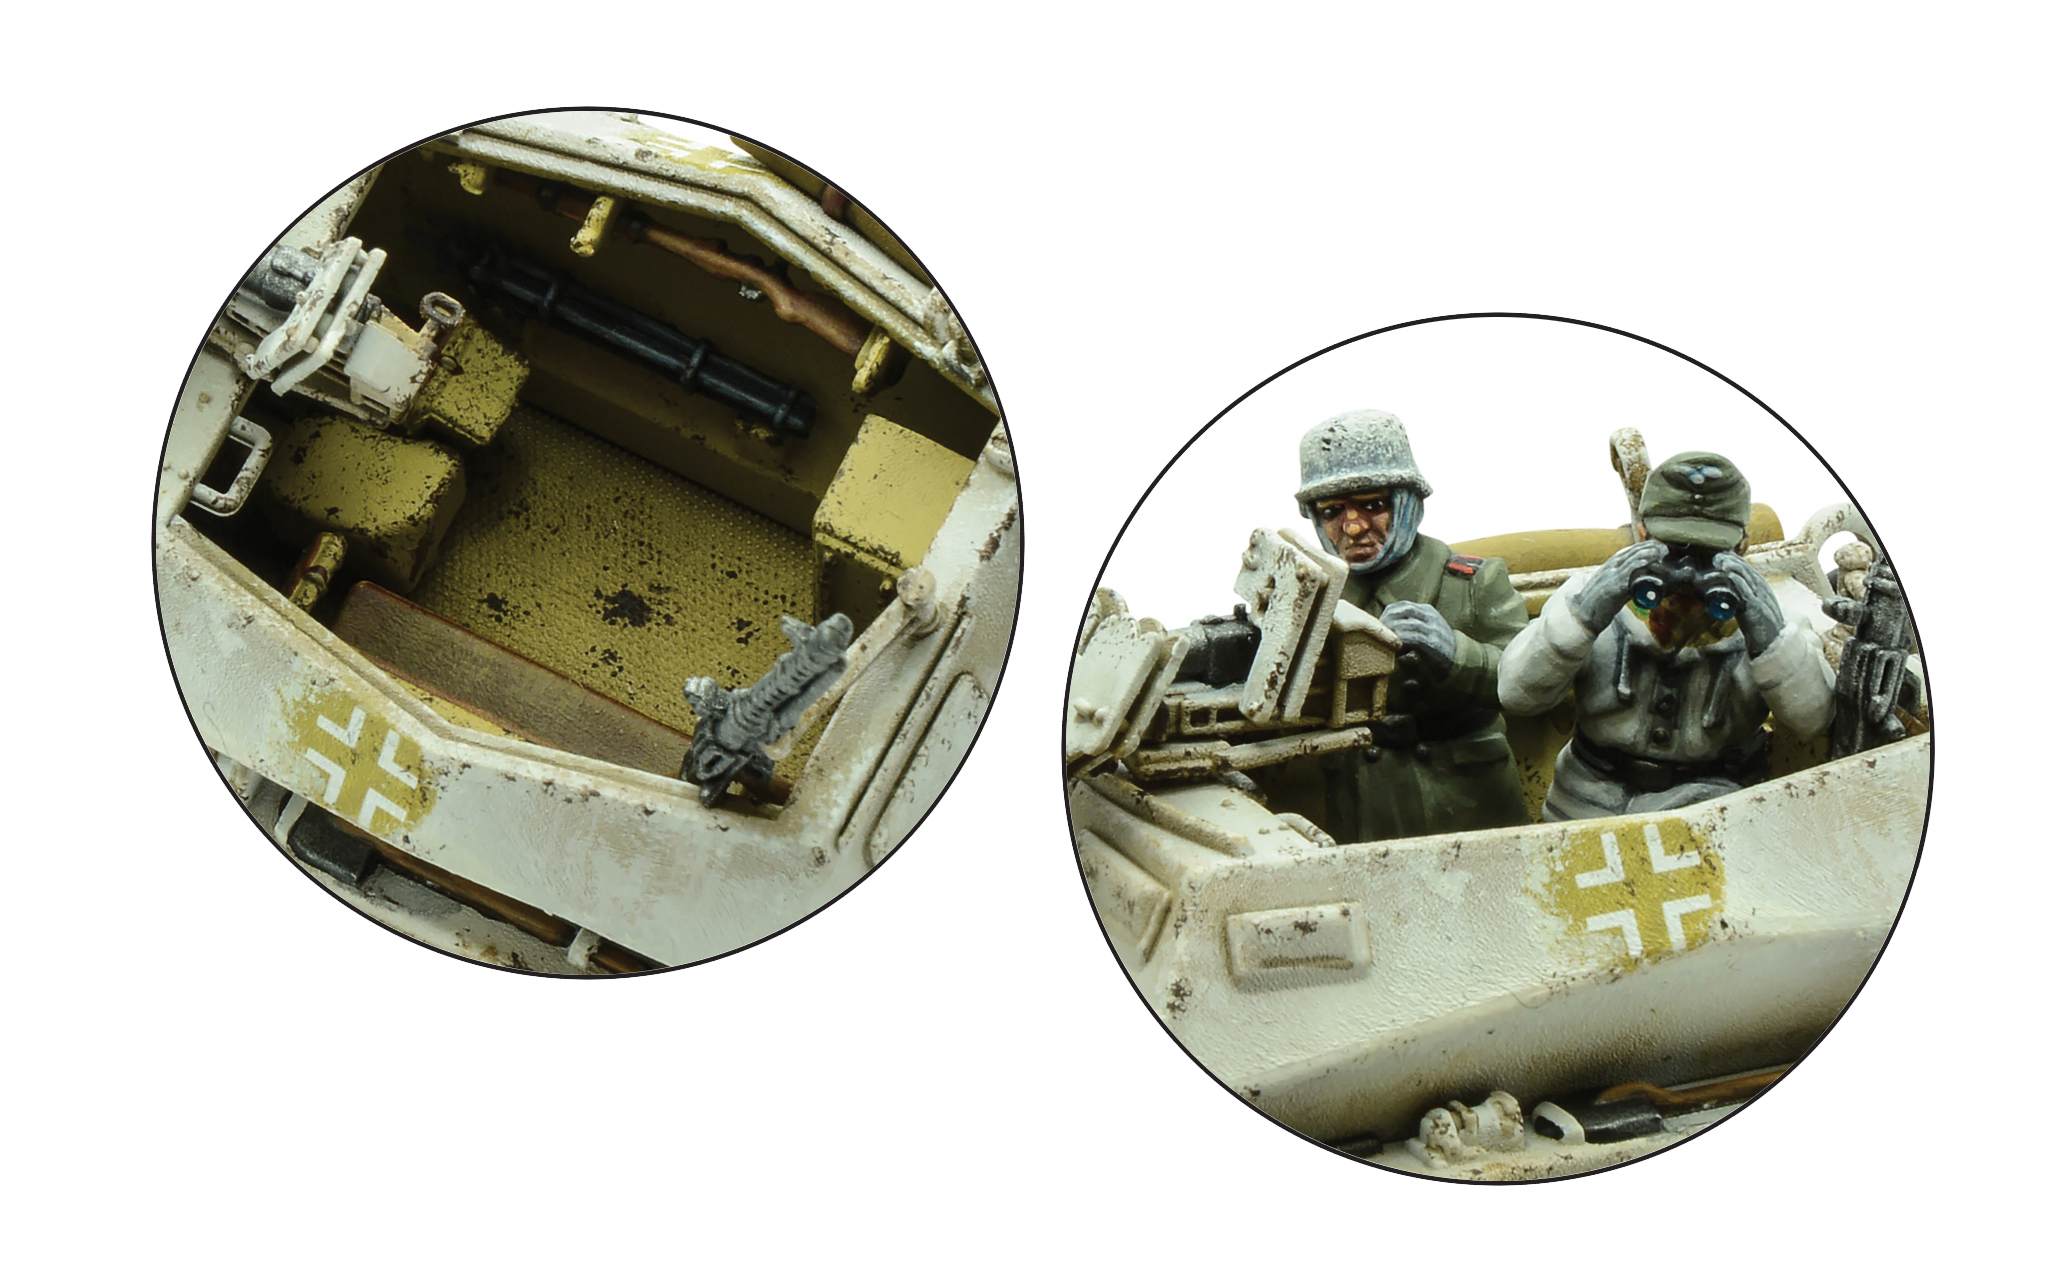 Incoming! Sd.Kfz 250 (Alte) & Opel Variants - Warlord Community